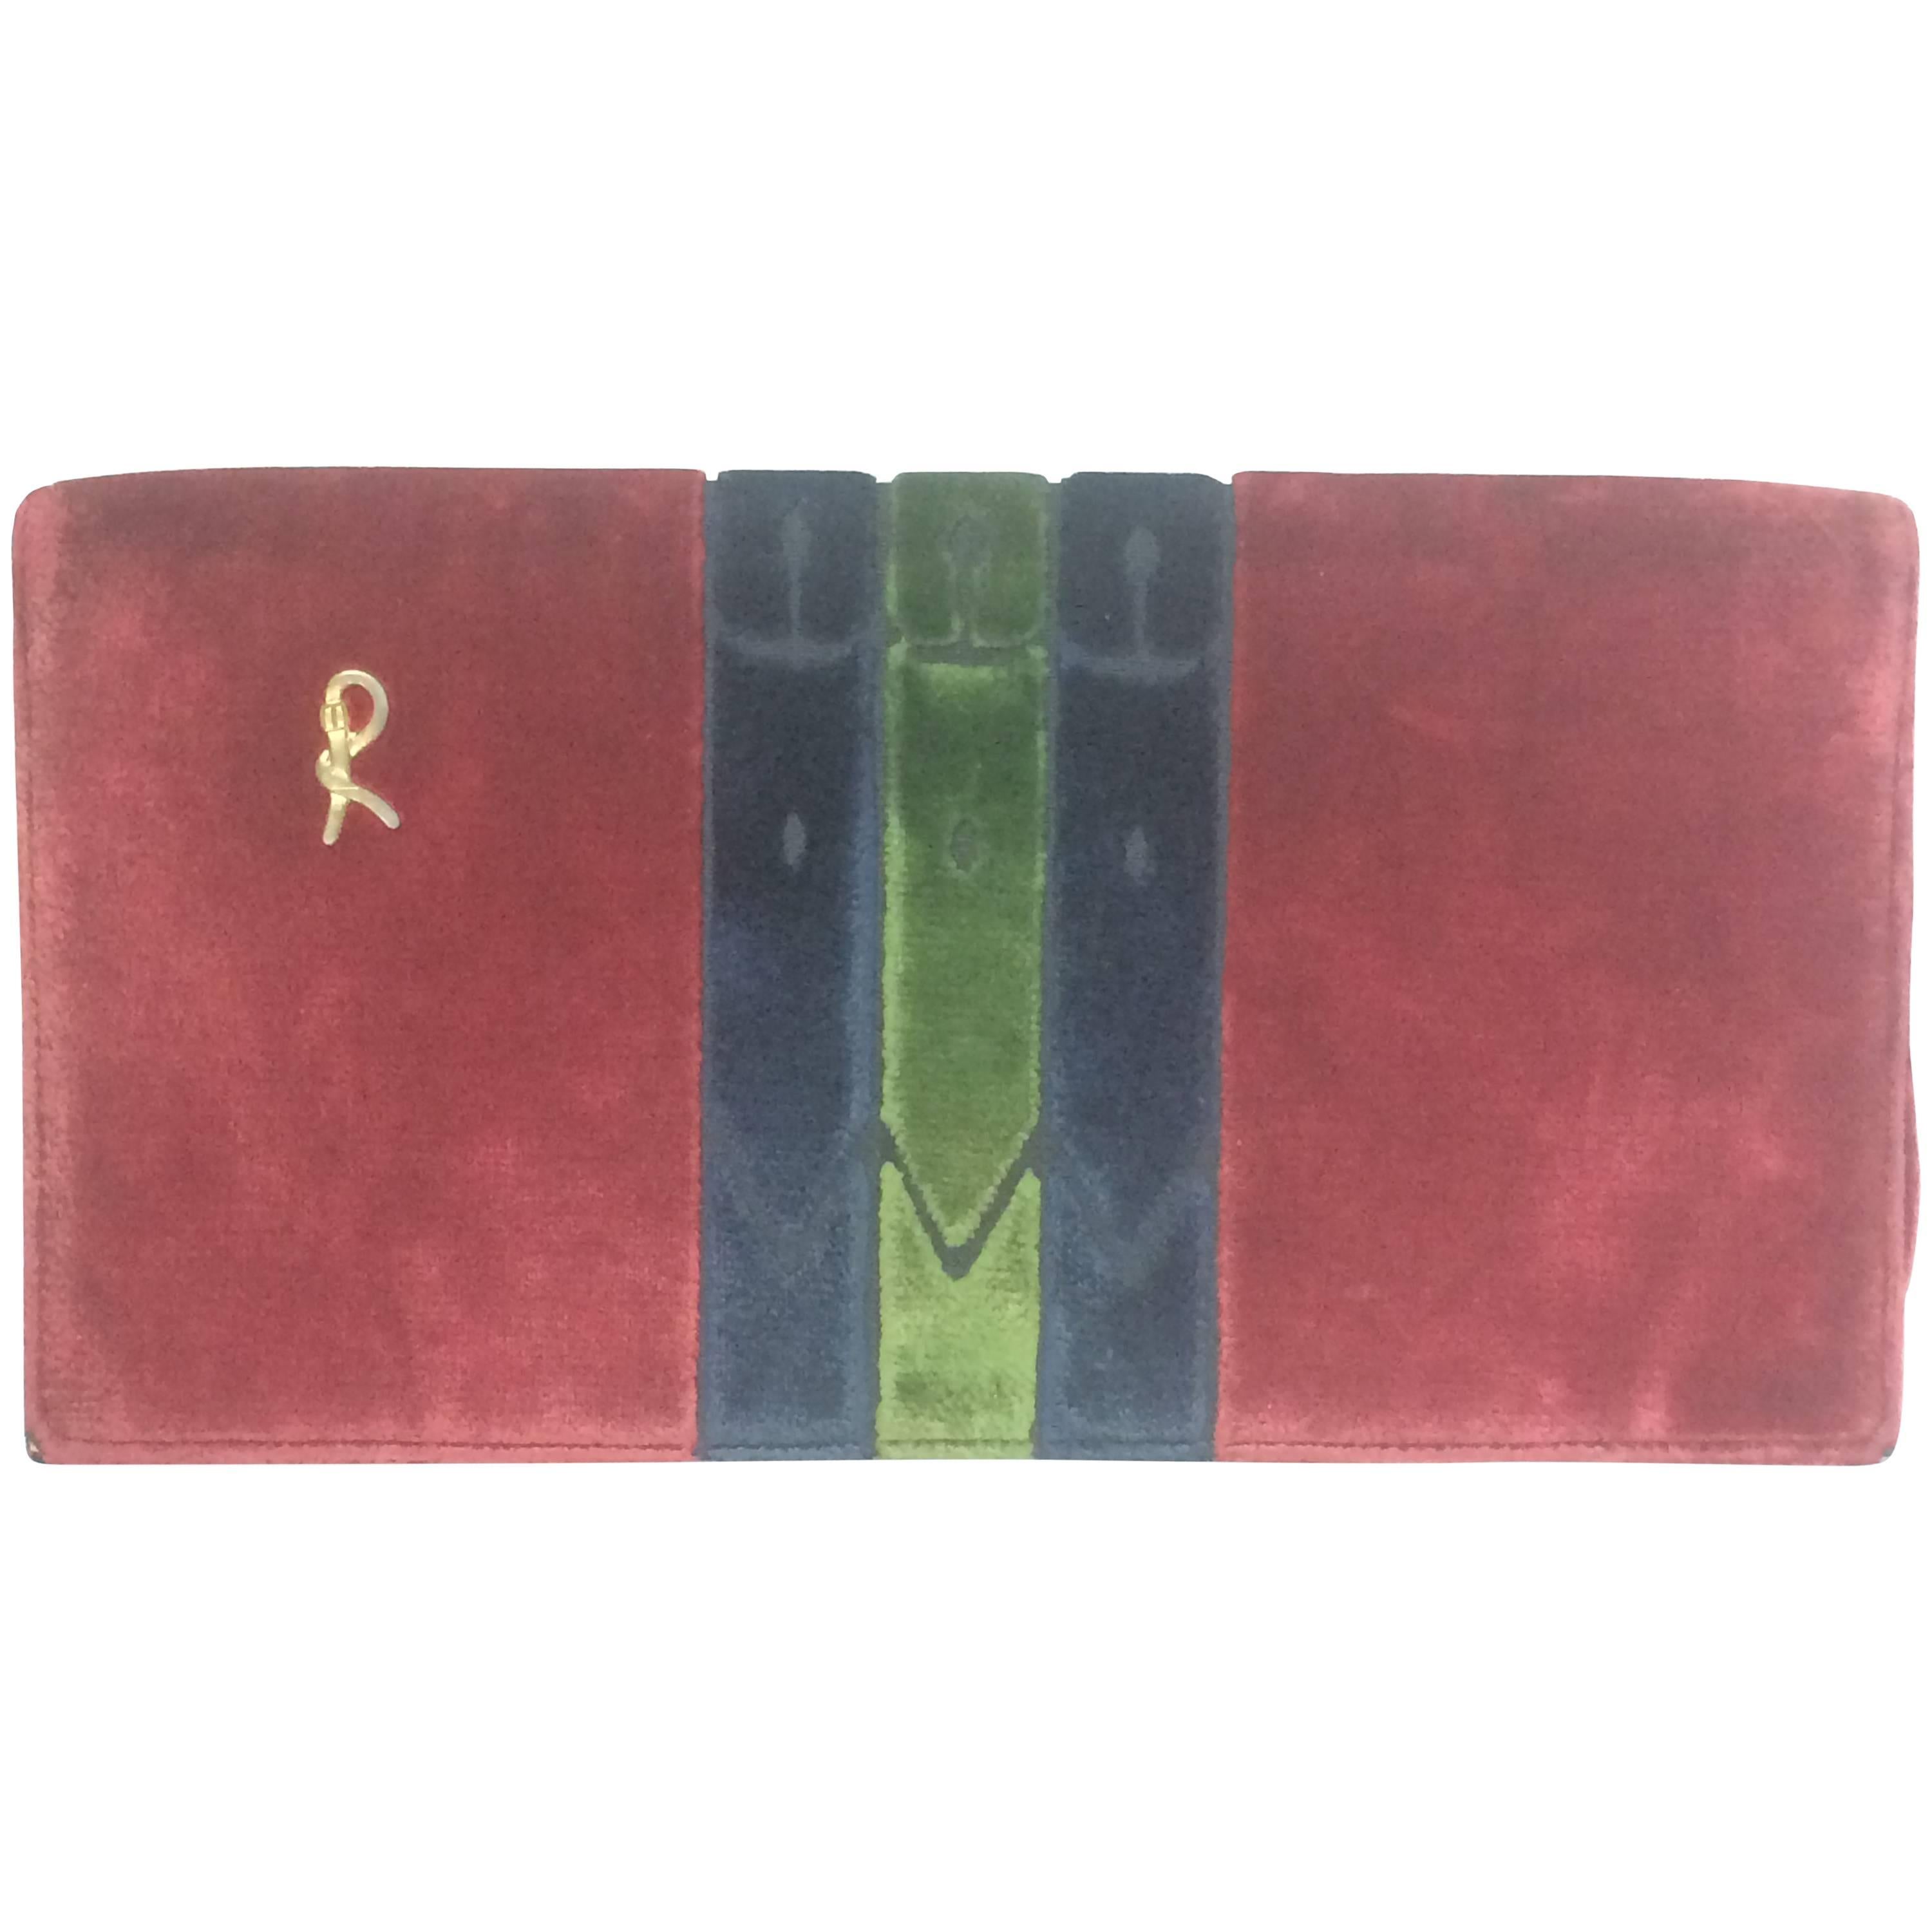 80's Vintage Roberta di Camerino velvet, chenille clutch in red, navy and green.